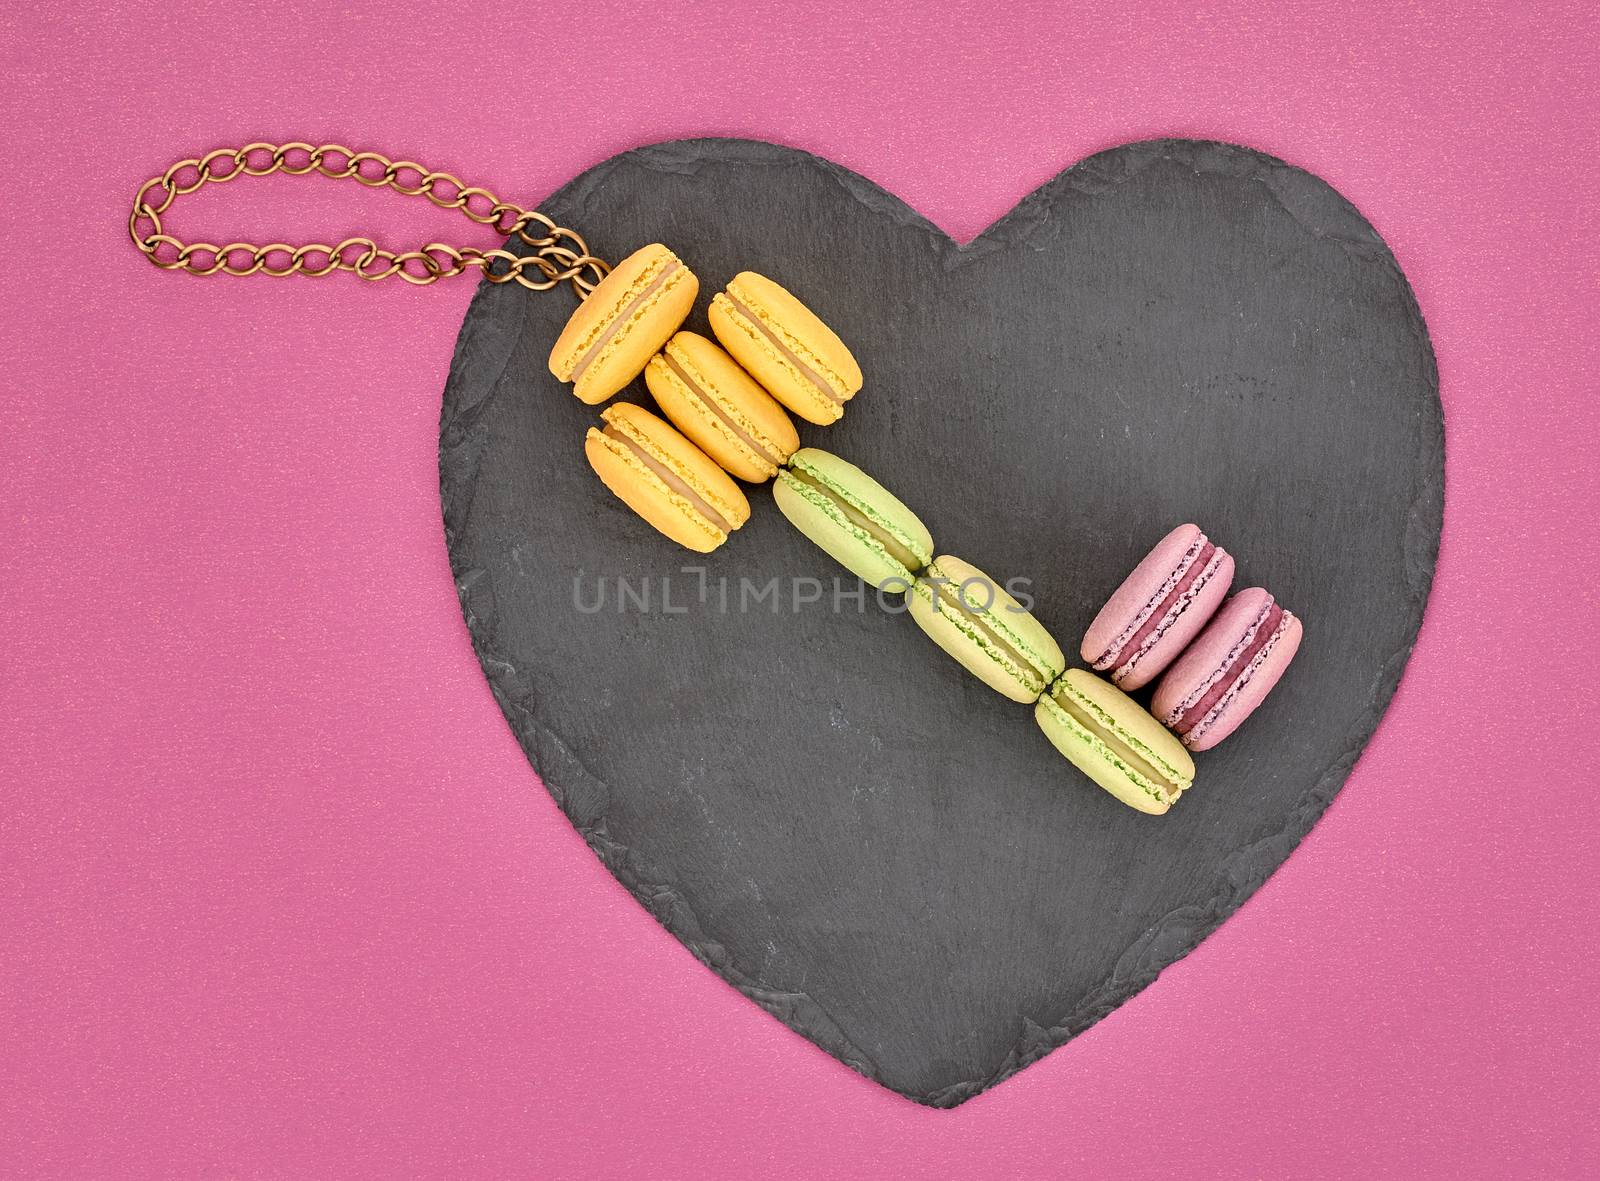 Still life, macarons sweet colorful, key shape, heart black placemat. French traditional delicious dessert with chain. Unusual creative romantic, gray background. Concept for love story.Valentines Day